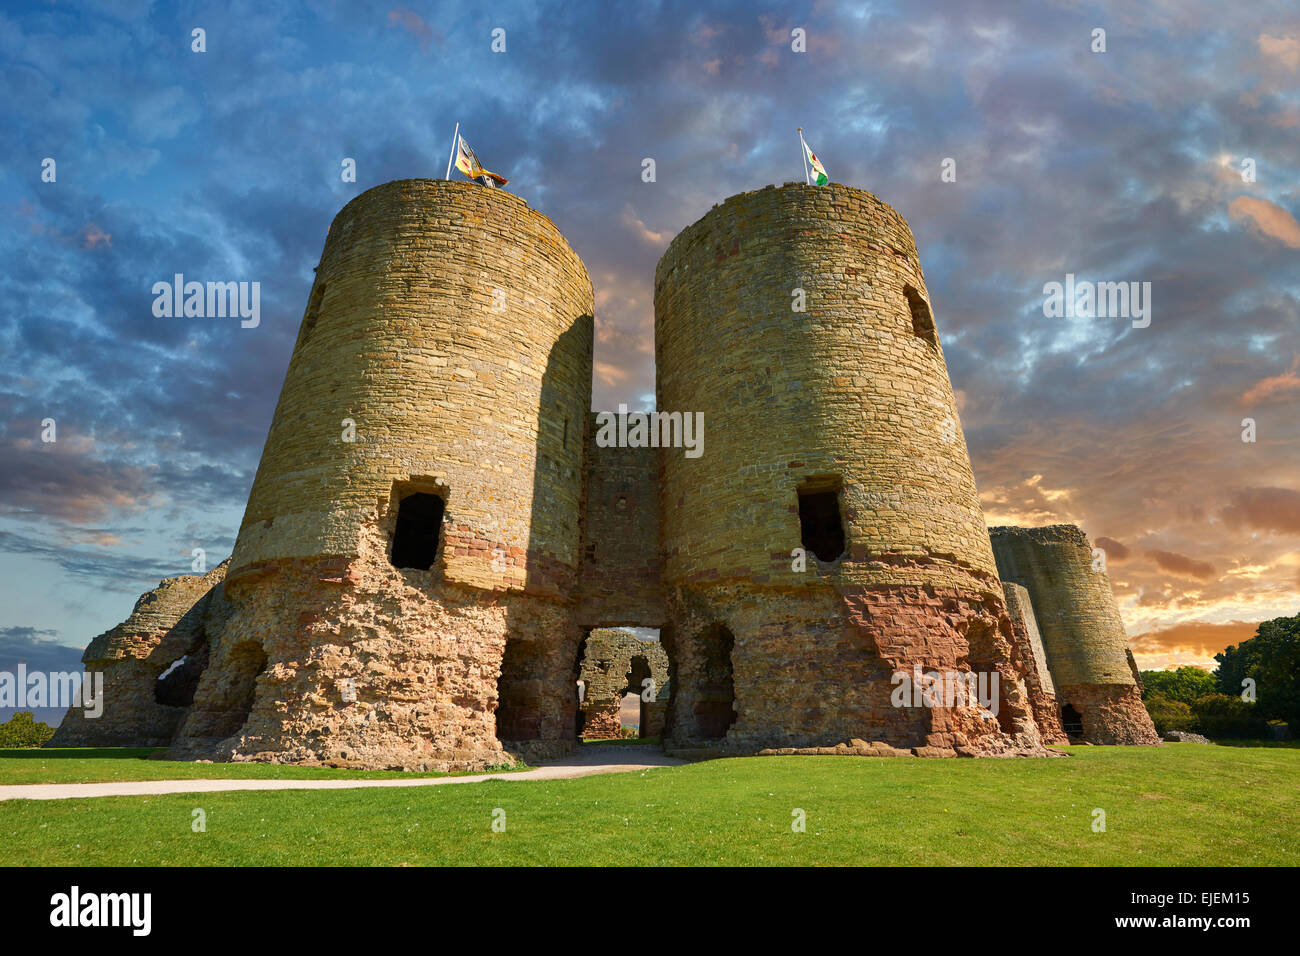 Rhuddlan Castle built in 1277 for Edward 1st next to the River Clwyd, Rhuddlan, Denbighshire, Wales Stock Photo